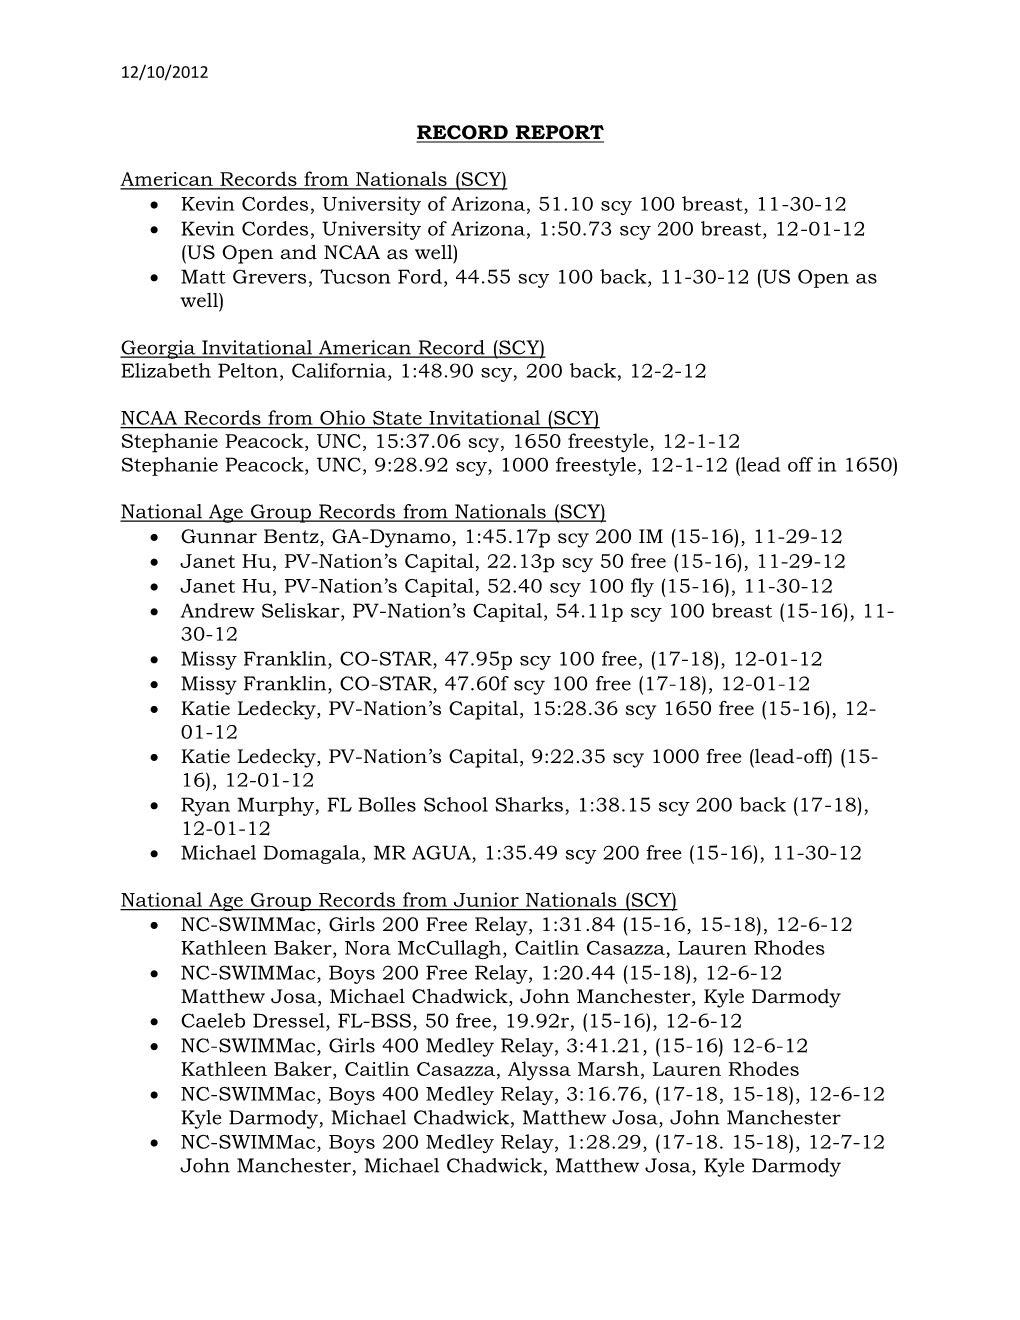 National Swimming Record Report